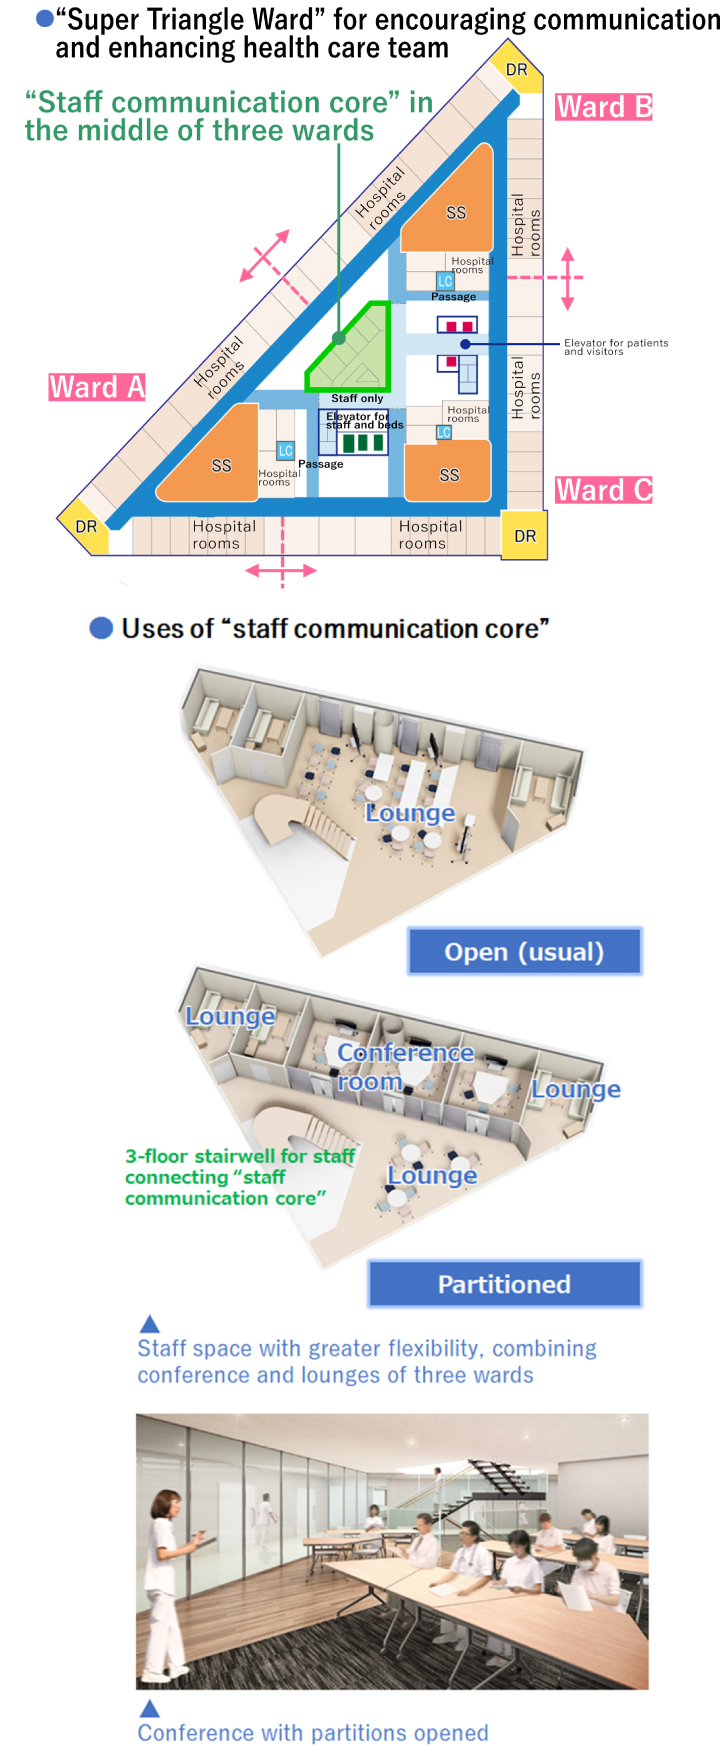 “Super Triangle Ward” for encouraging communication and enhancing team medical care